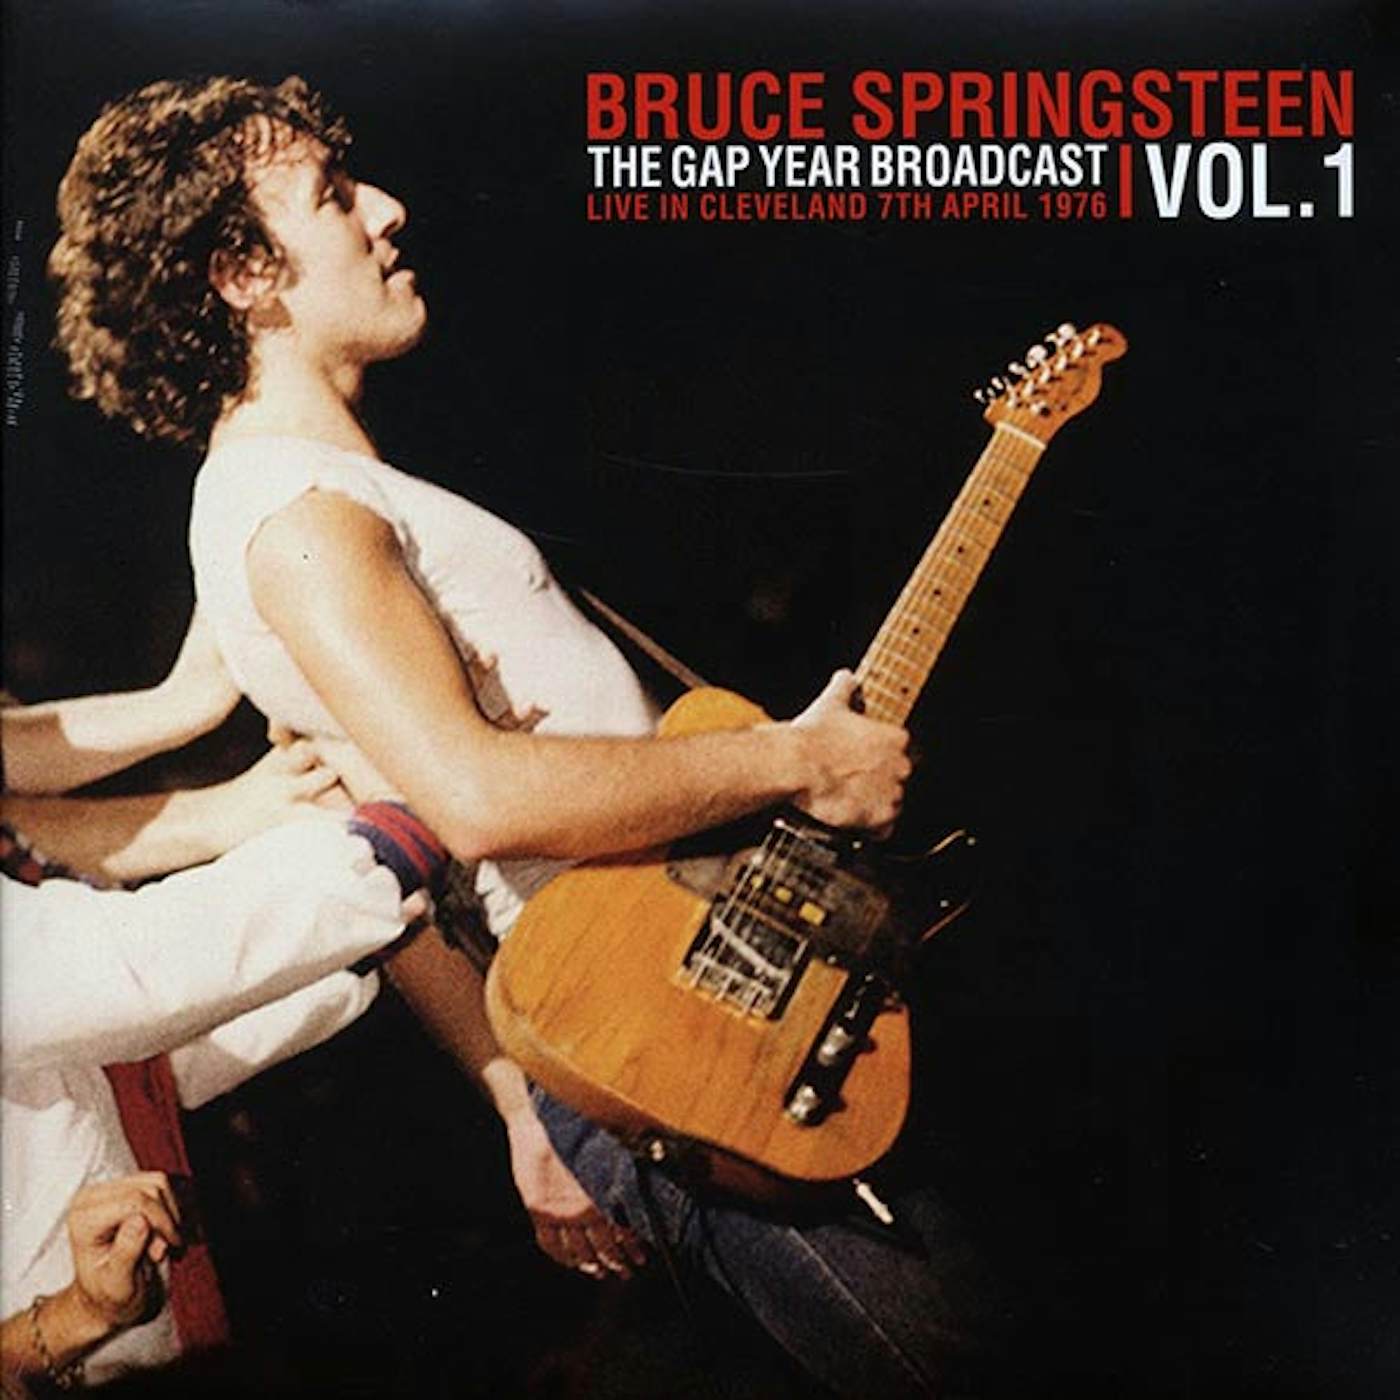 Bruce Springsteen  LP -  The Gap Year Broadcast Volume 1: Live In Cleveland 7th April 1976 (2xLP) (Vinyl)